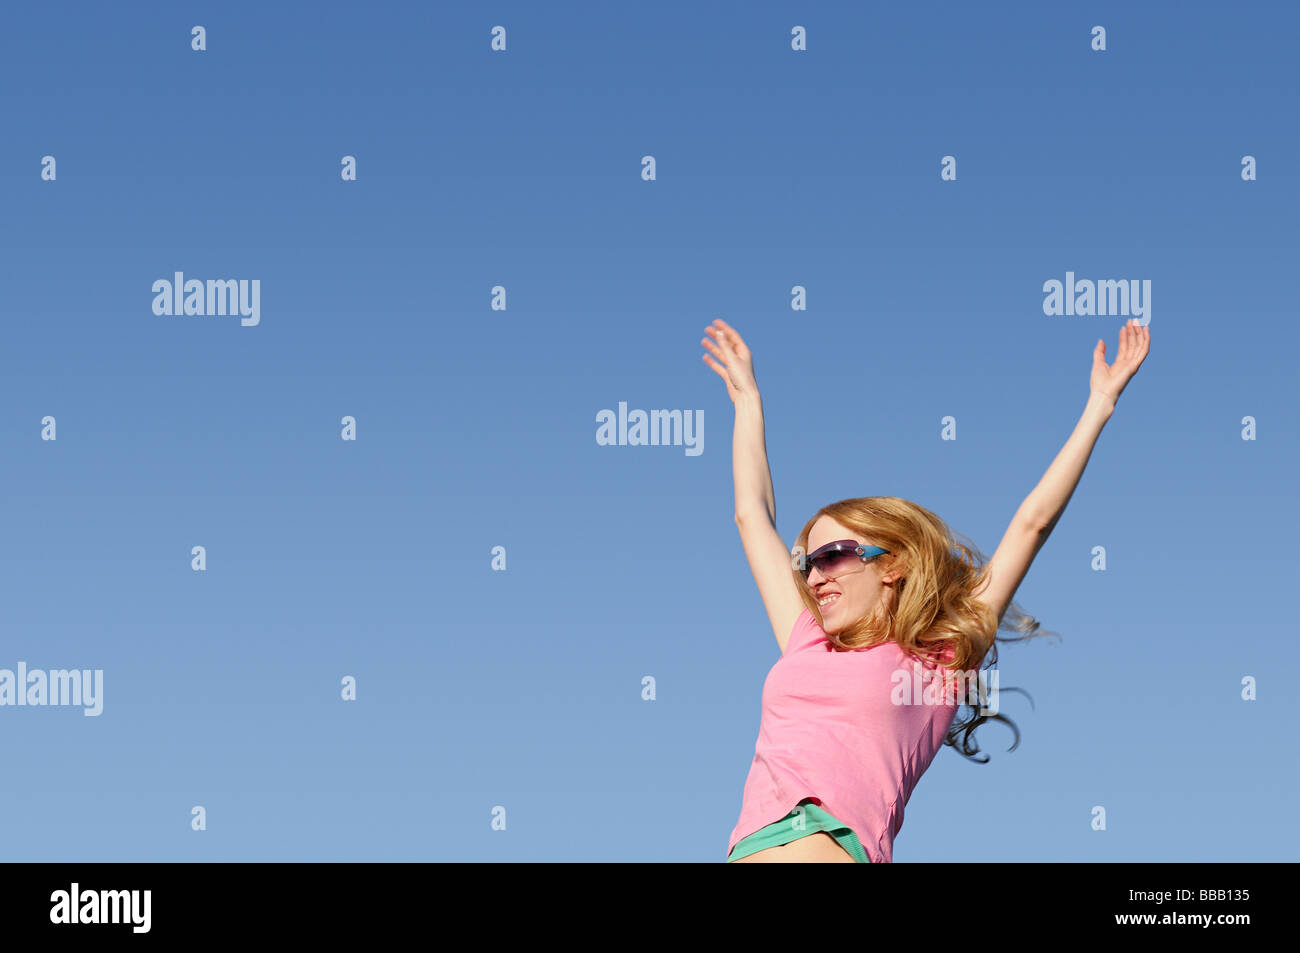 Woman With Arms Raised Against a Blue Sky Stock Photo